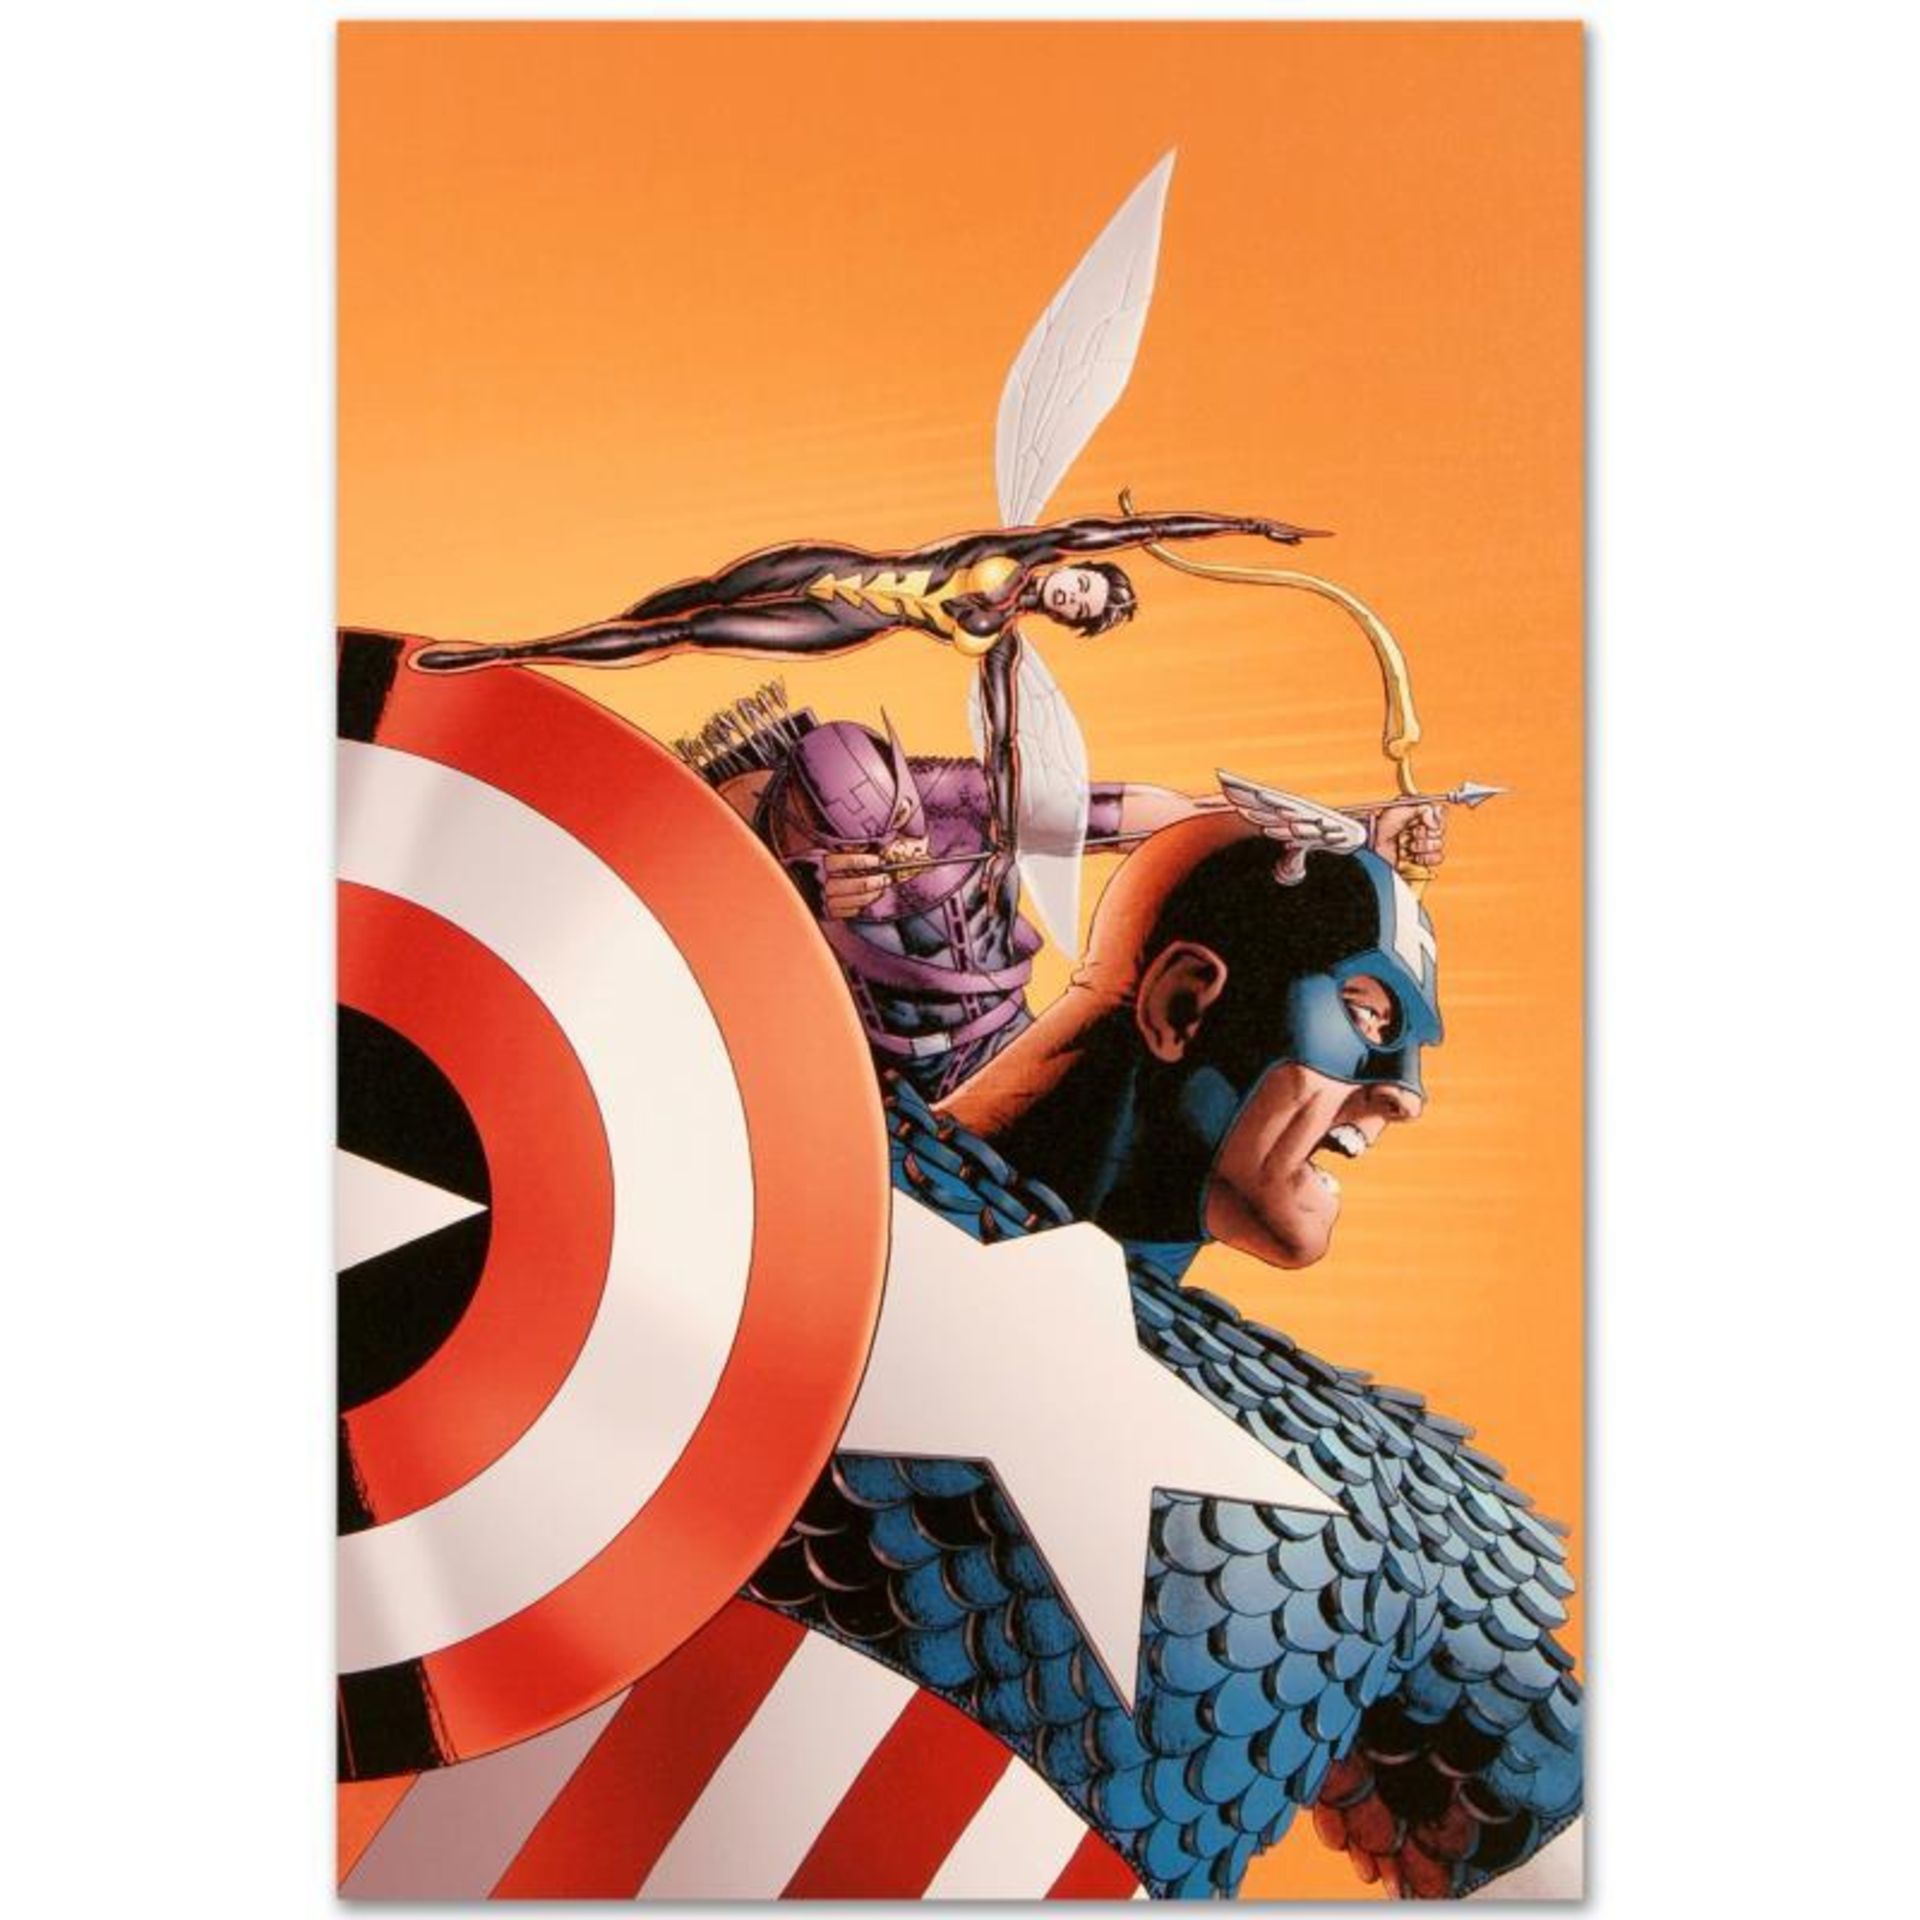 Marvel Comics "Avengers #77" Numbered Limited Edition Giclee on Canvas by John C